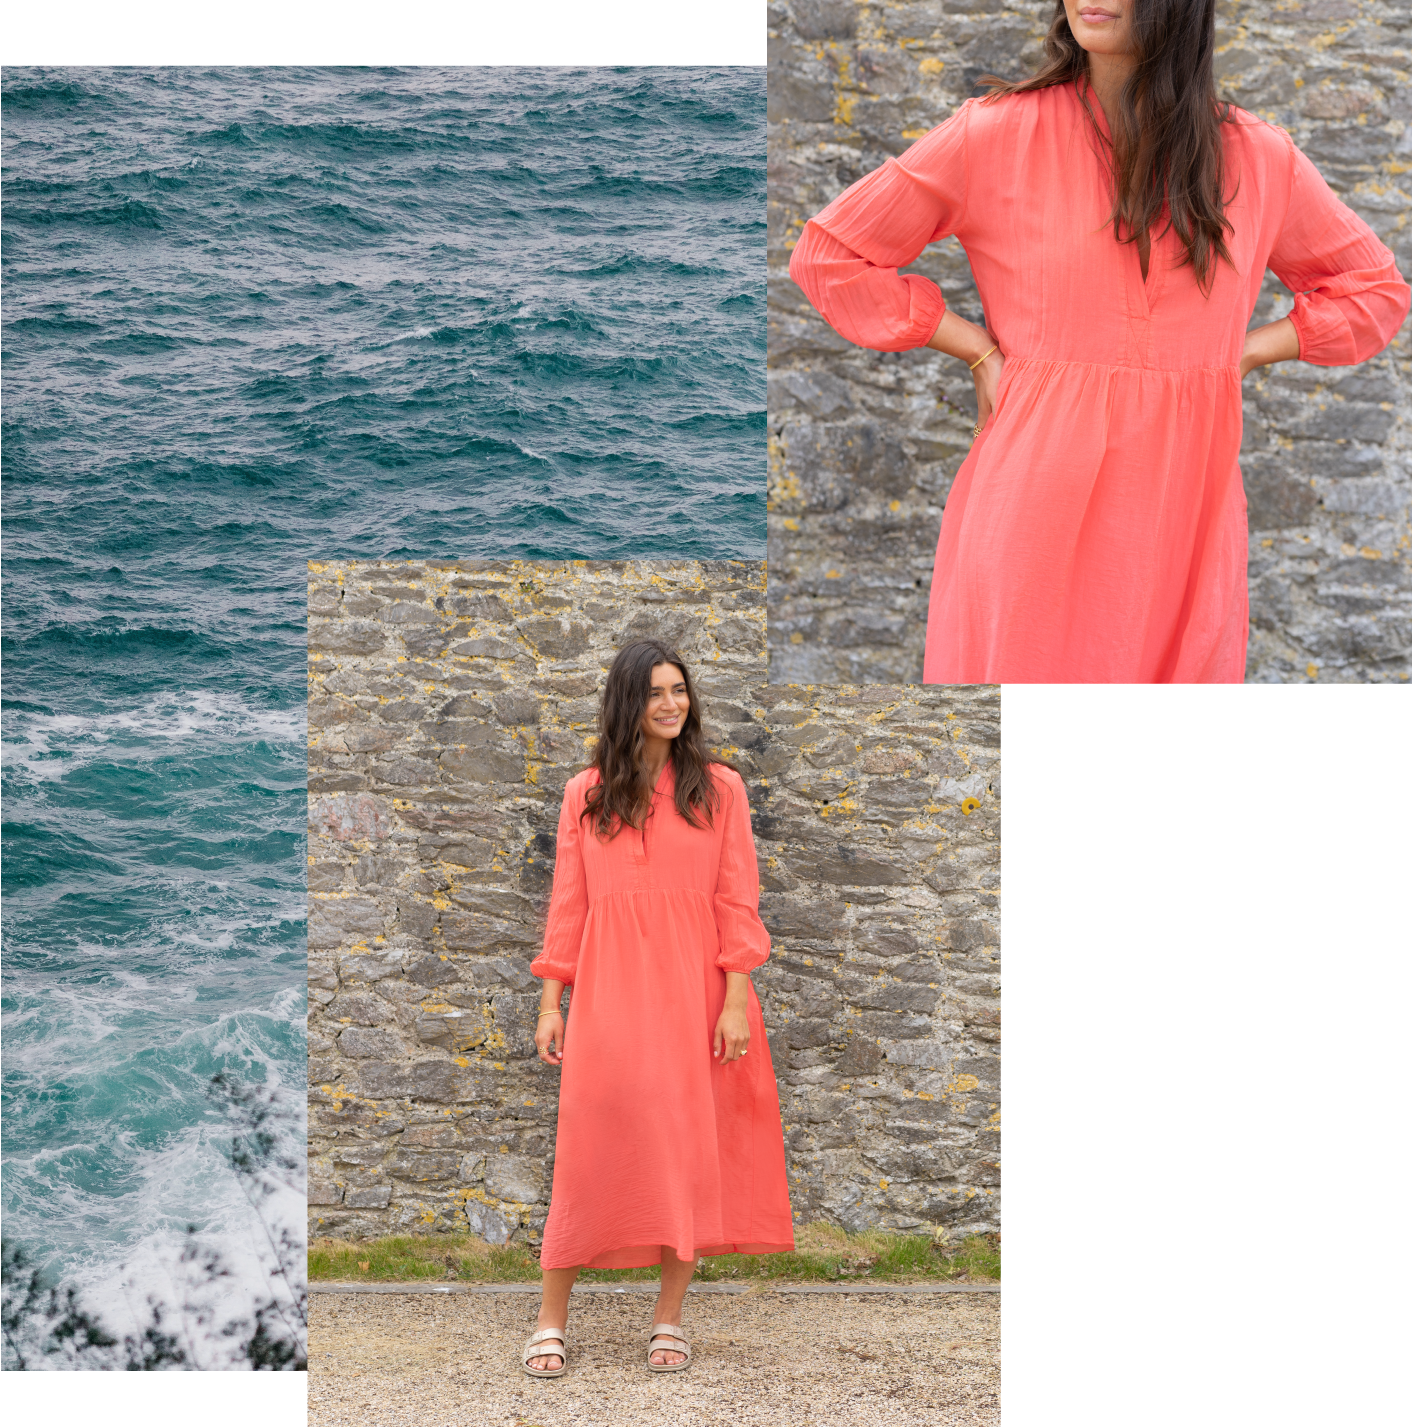 A montage of the sea with images of a model wearing a pink, long sleeved dress